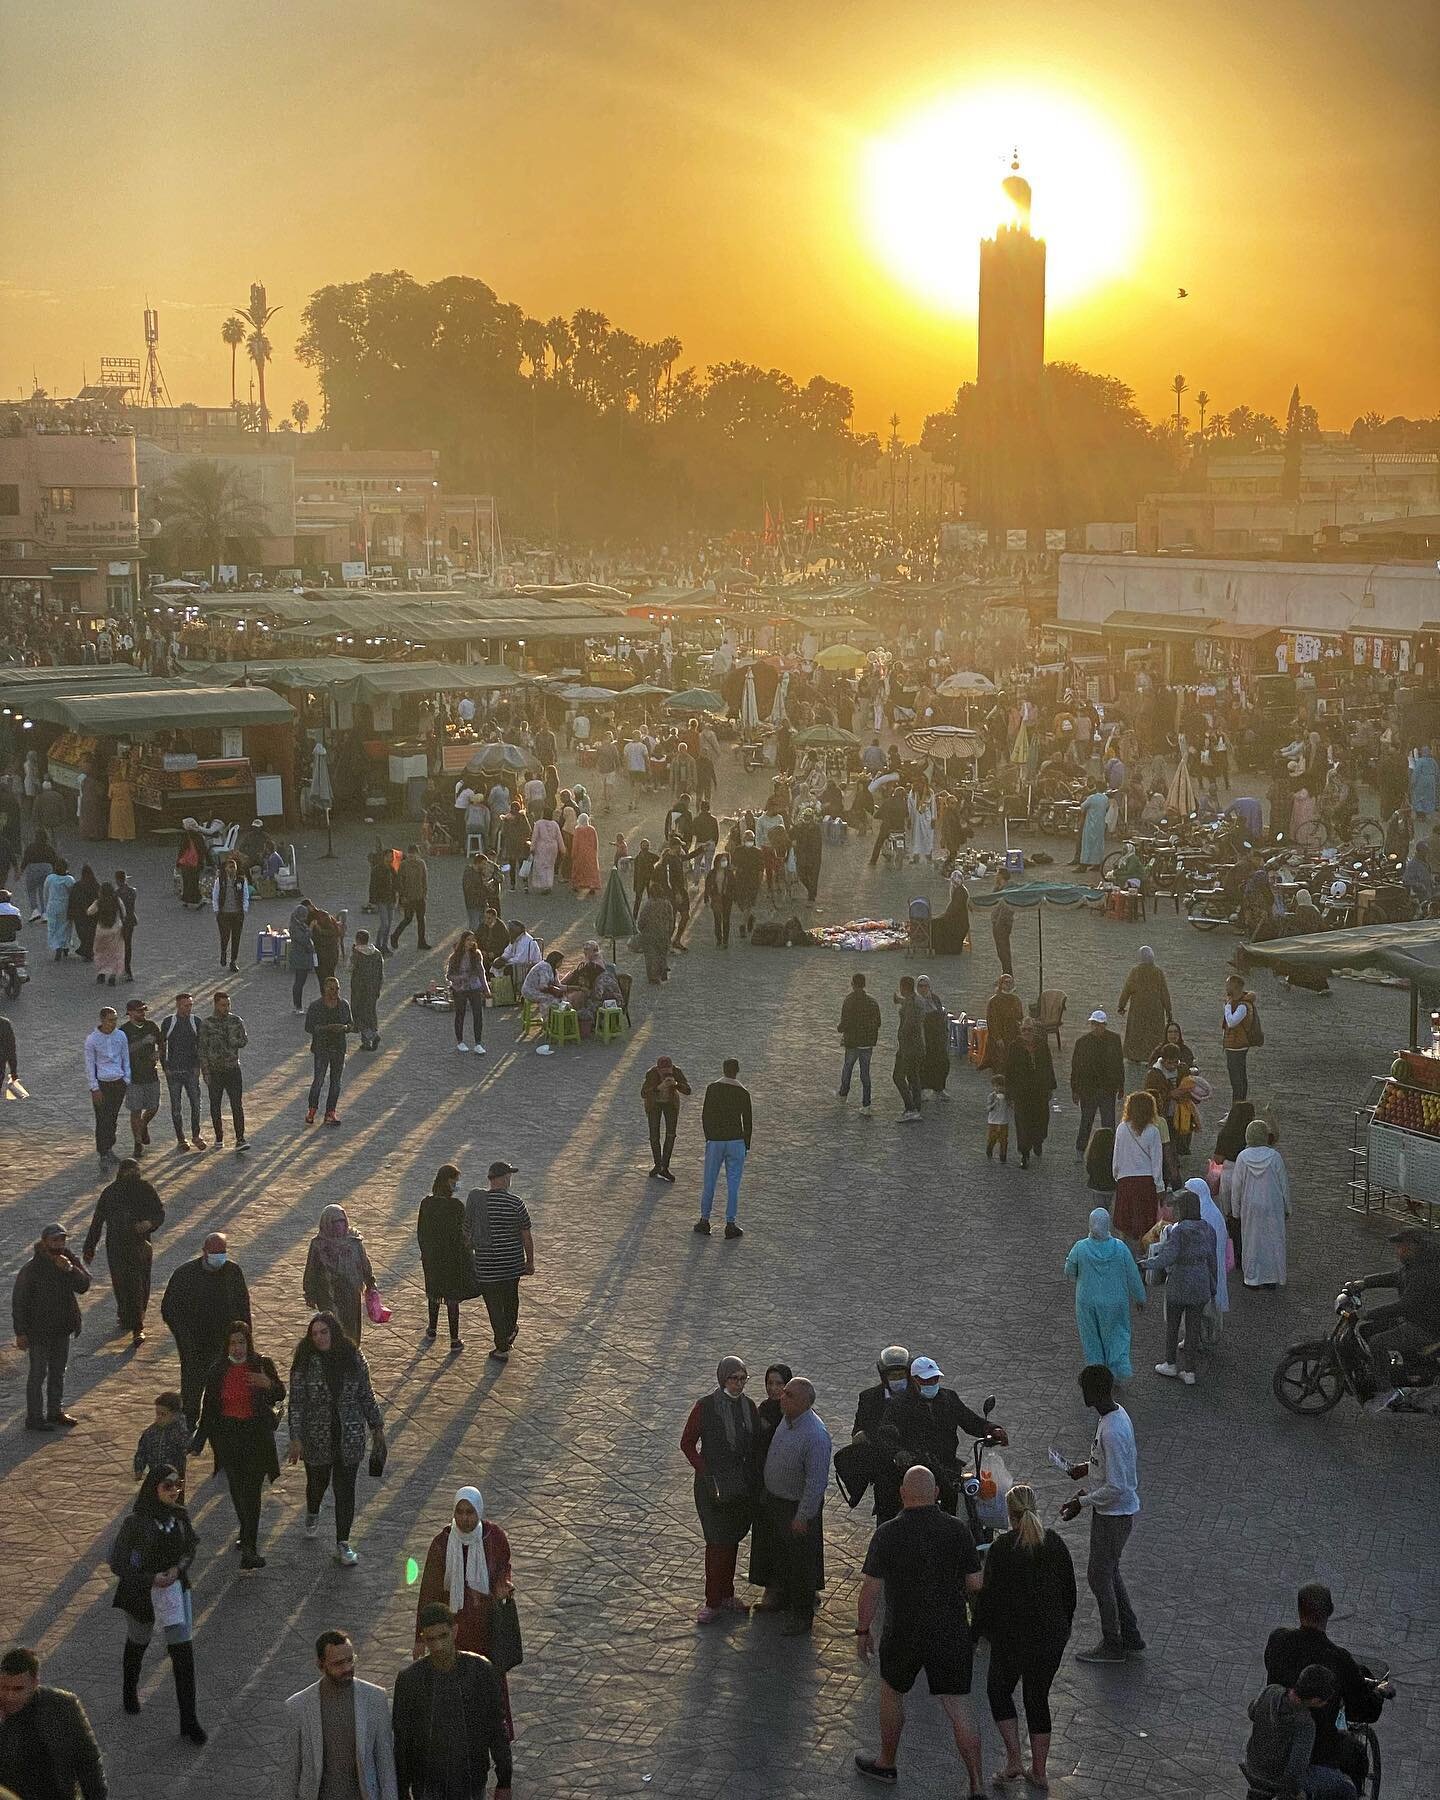 We are hoping that the sun has set for good on the Covid-19 crisis in Morocco. 
🇲🇦
Close to 80% of the population is vaccinated, tourists are back en masse, the curfew has been eliminated altogether, new cases are very low, and all the usual busine